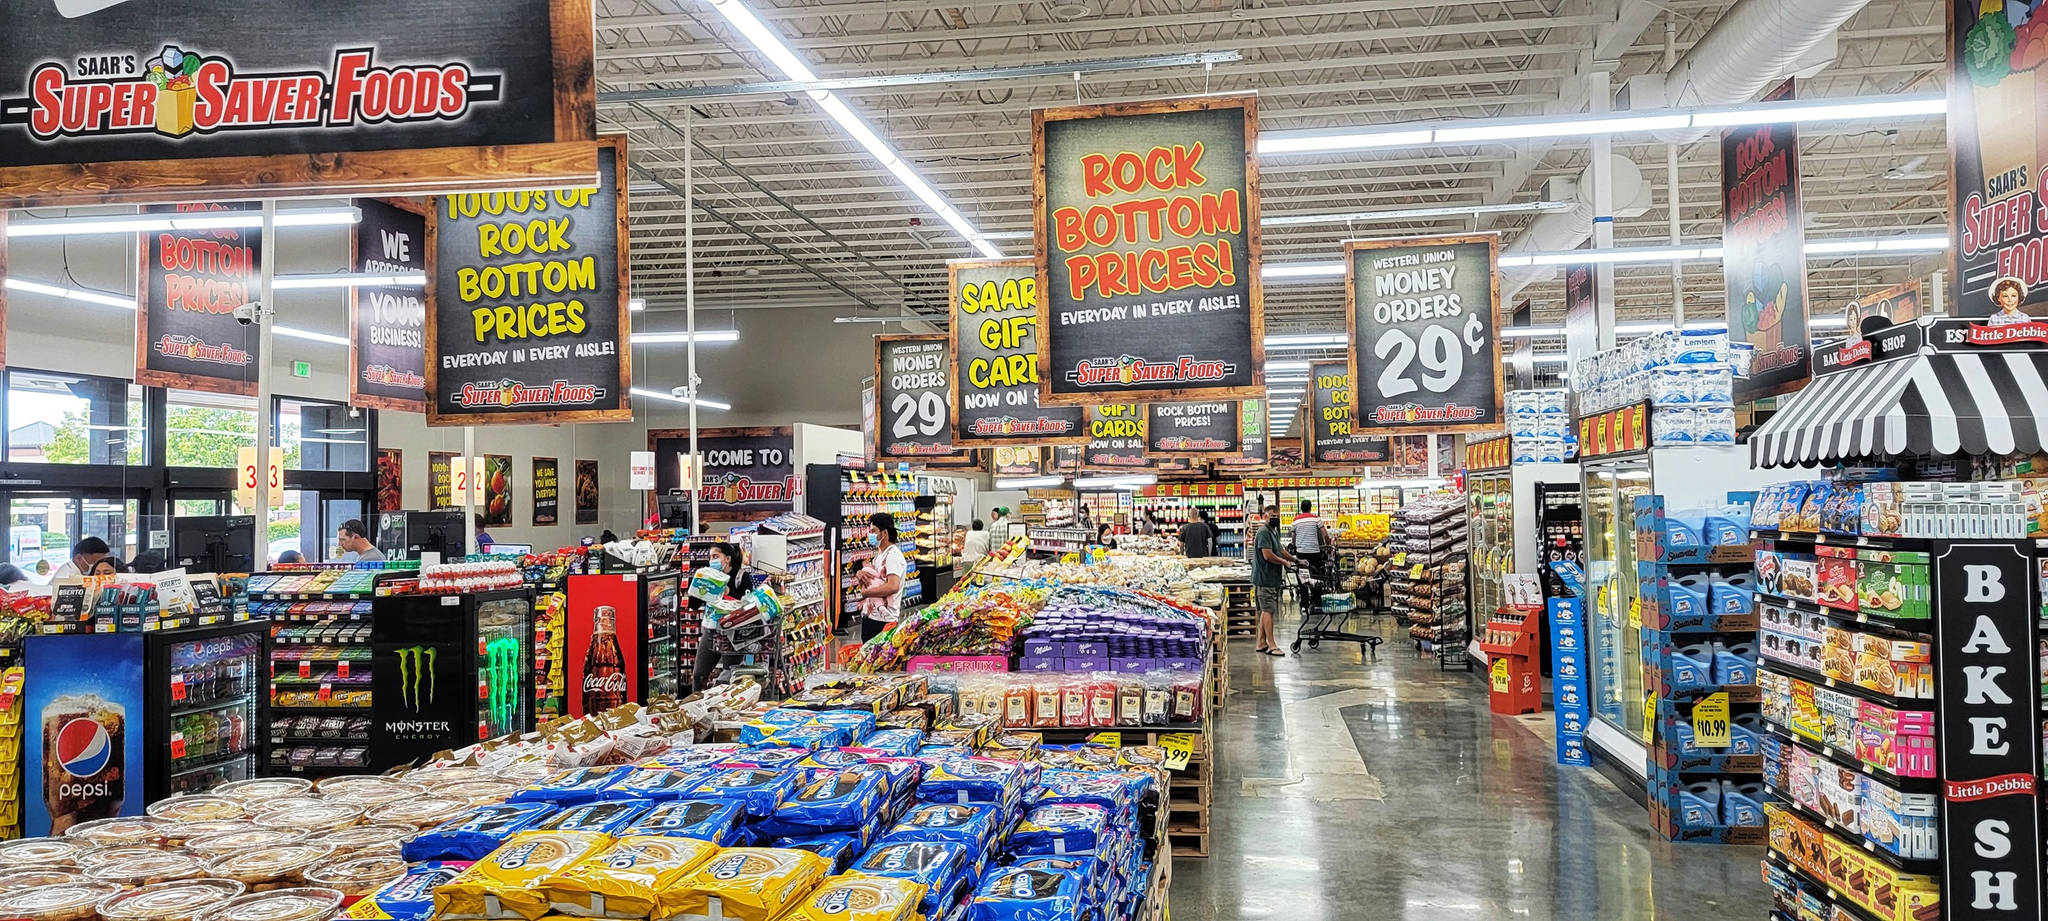 Saar’s Super Saver Foods opened June 30 in Kent, its ninth location in the Puget Sound area. COURTESY PHOTO, Saar’s